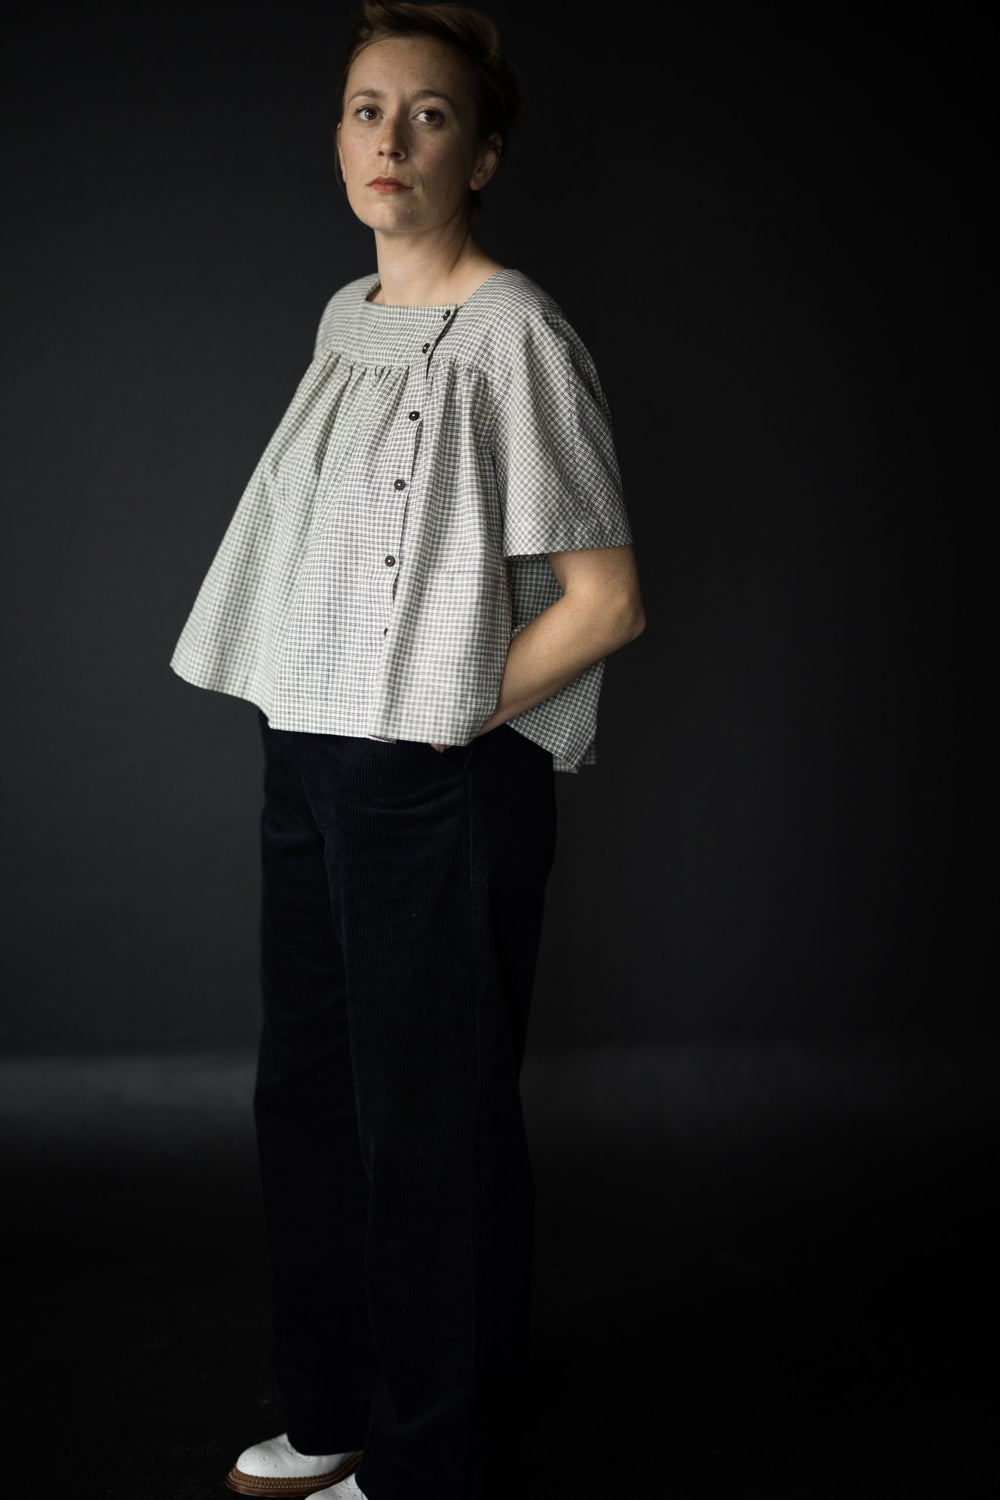 Woman wearing the The Omilie Top sewing pattern from Merchant & Mills on The Fold Line. A top pattern made in linen, brushed cotton, cotton lawn, cotton poplin, tencel, Indian handlooms, linen or cotton double gauze fabrics, featuring a smock style, patch